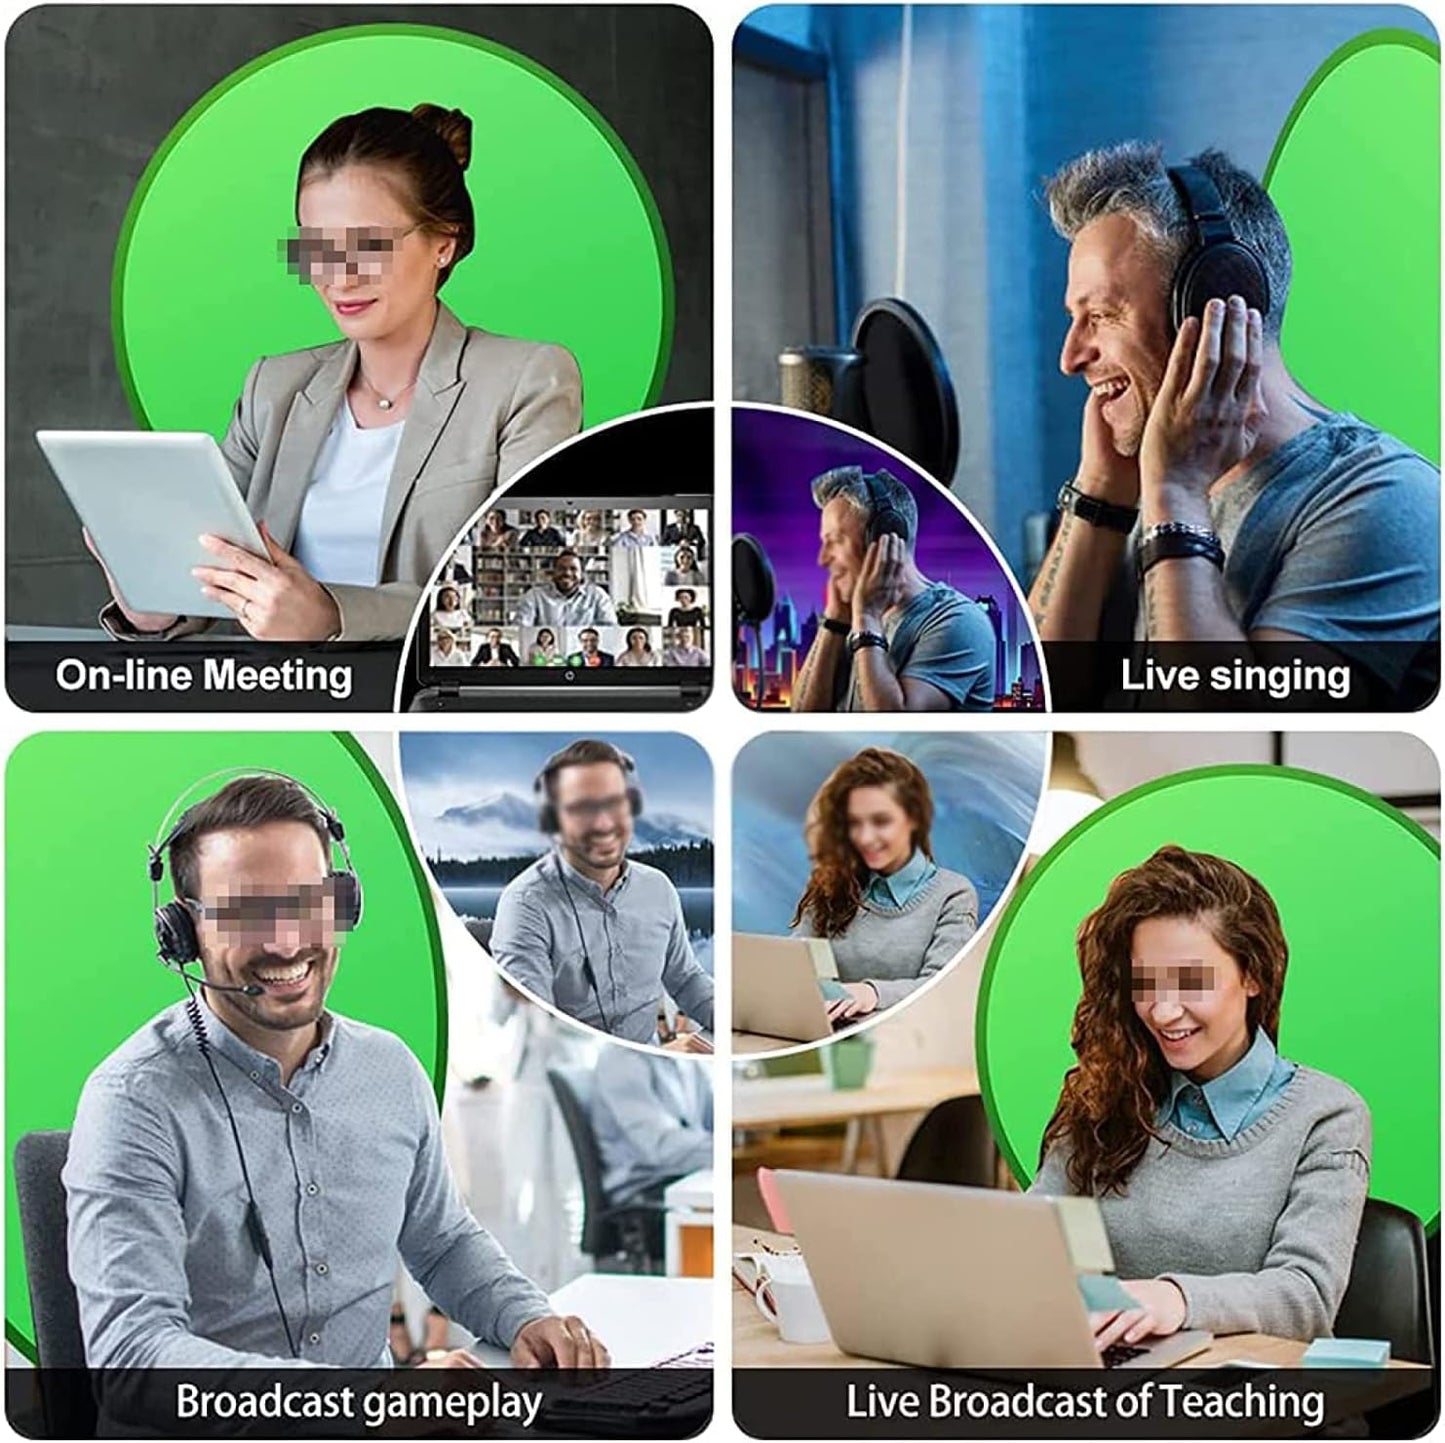 Portable Webcam Background, 75cm Collapsible Green Background for Video Chats, Zoom, Skype, Video, Photo, Single-Side Chromakey Green Screen for Chair